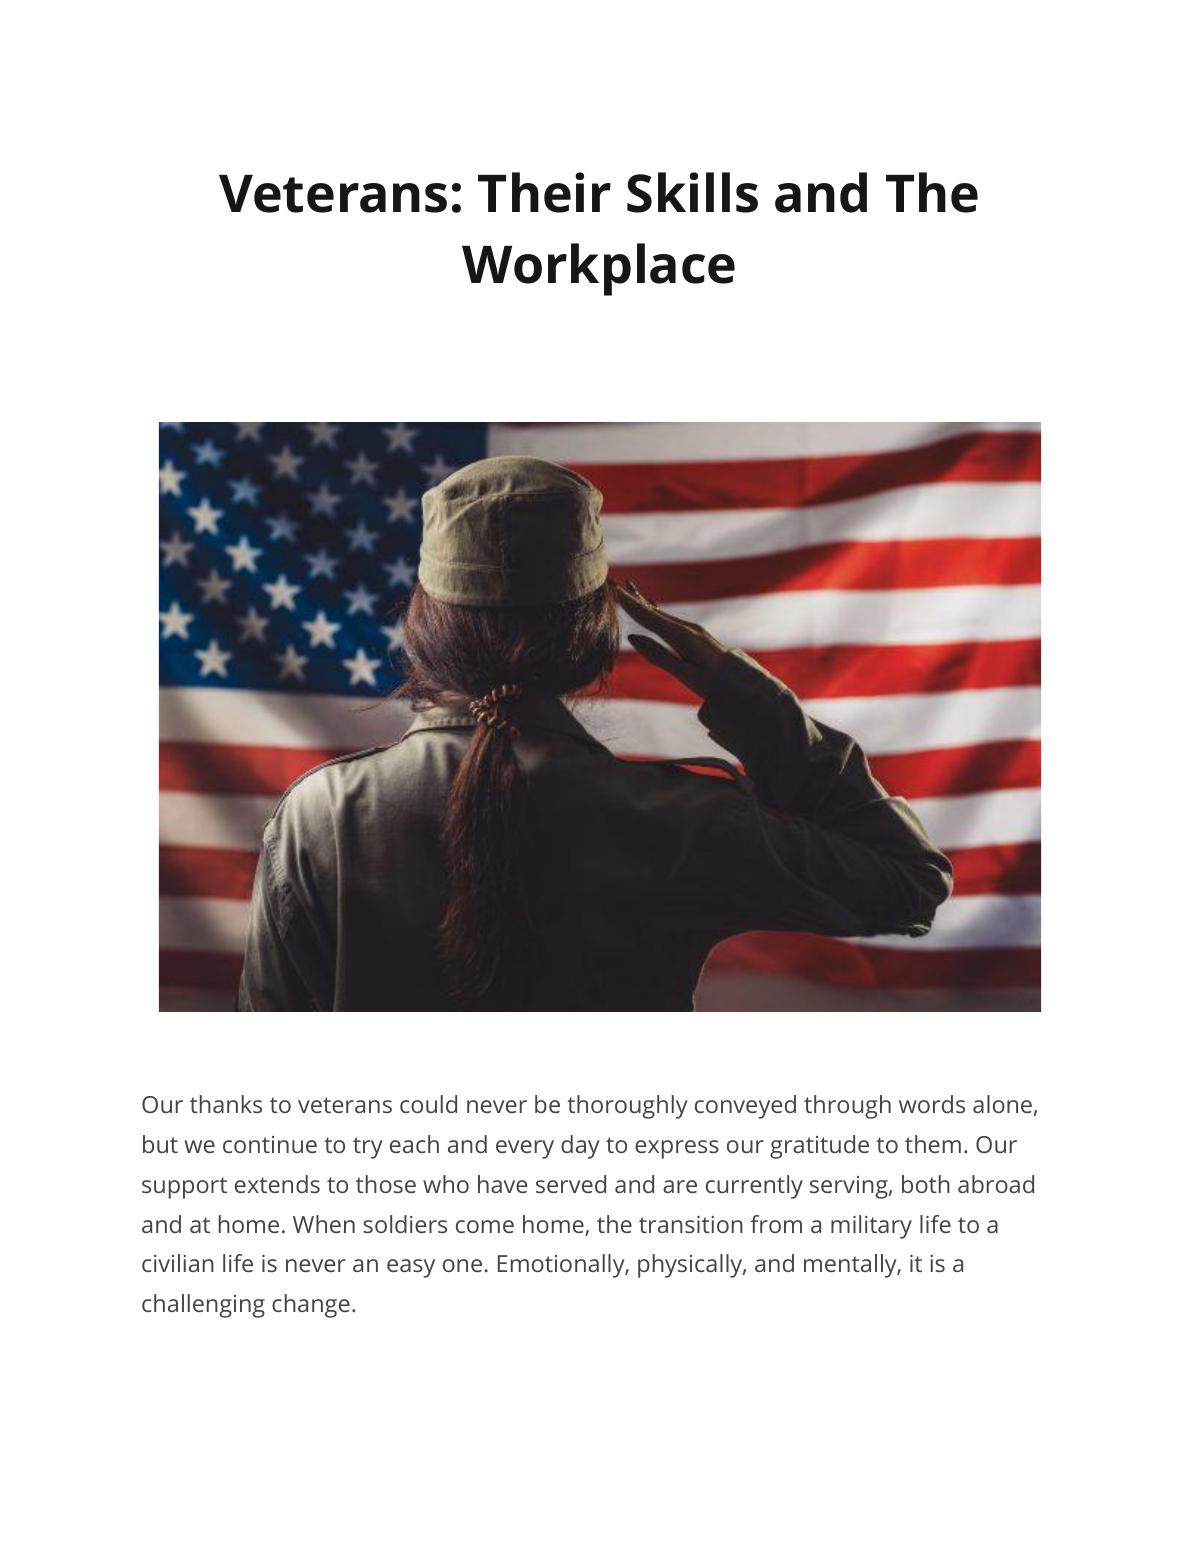 Veterans: Their Skills and The Workplace 